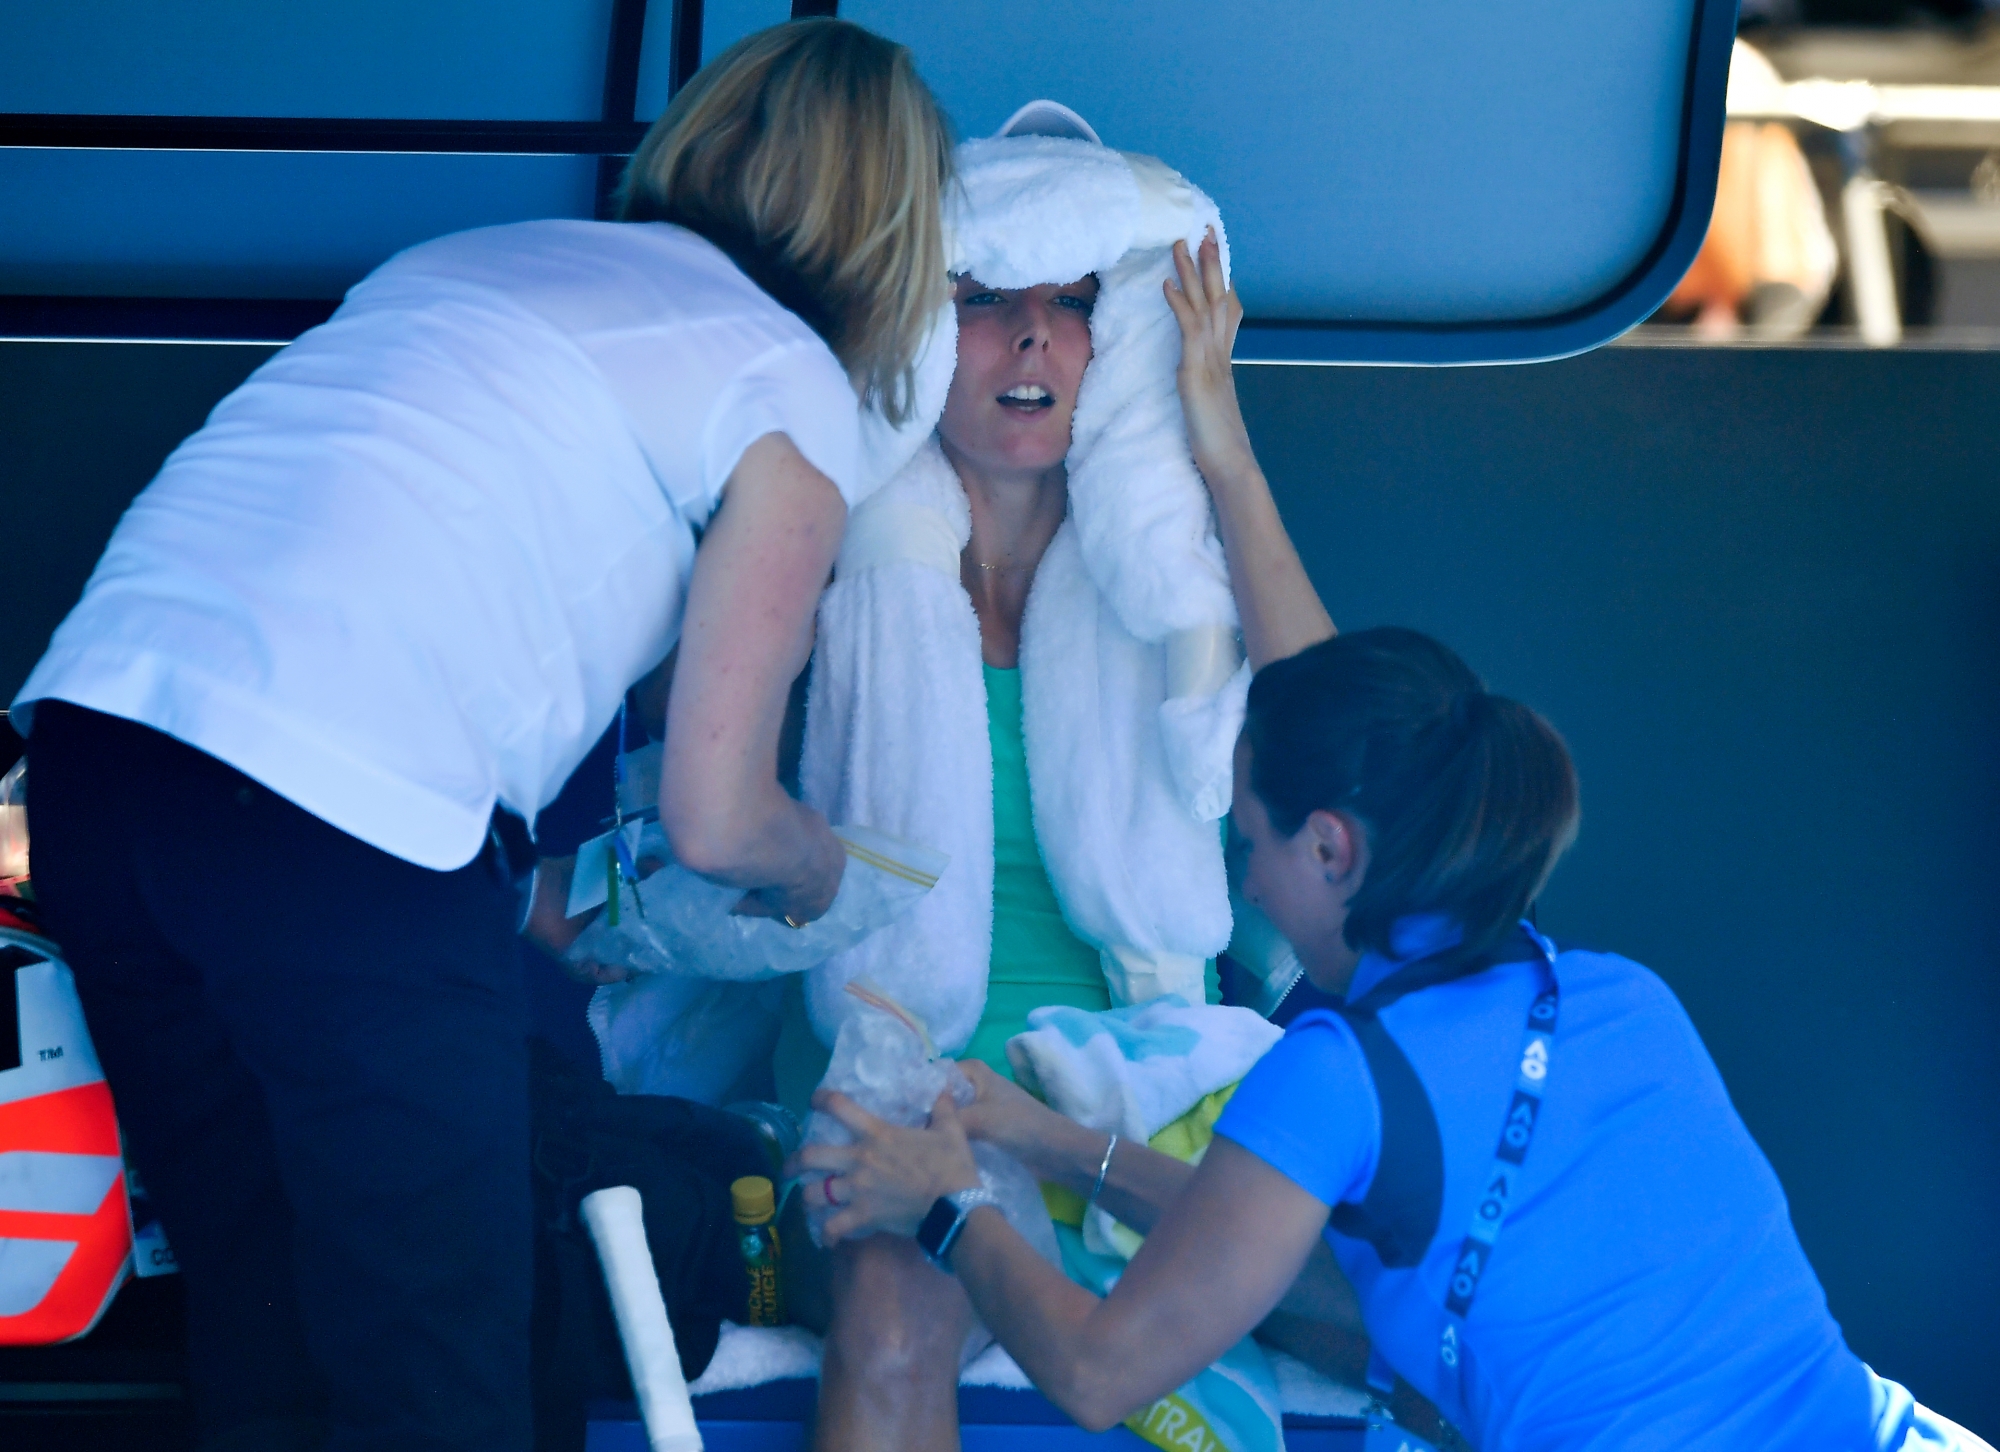 France's Alize Cornet is attended to by a trainer and tournament staff after suffering from the heat during her third round match against Belgium's Elise Mertens at the Australian Open tennis championships in Melbourne, Australia, Friday, Jan. 19, 2018. (AP Photo/Andy Brownbill) APTOPIX Australian Open Tennis